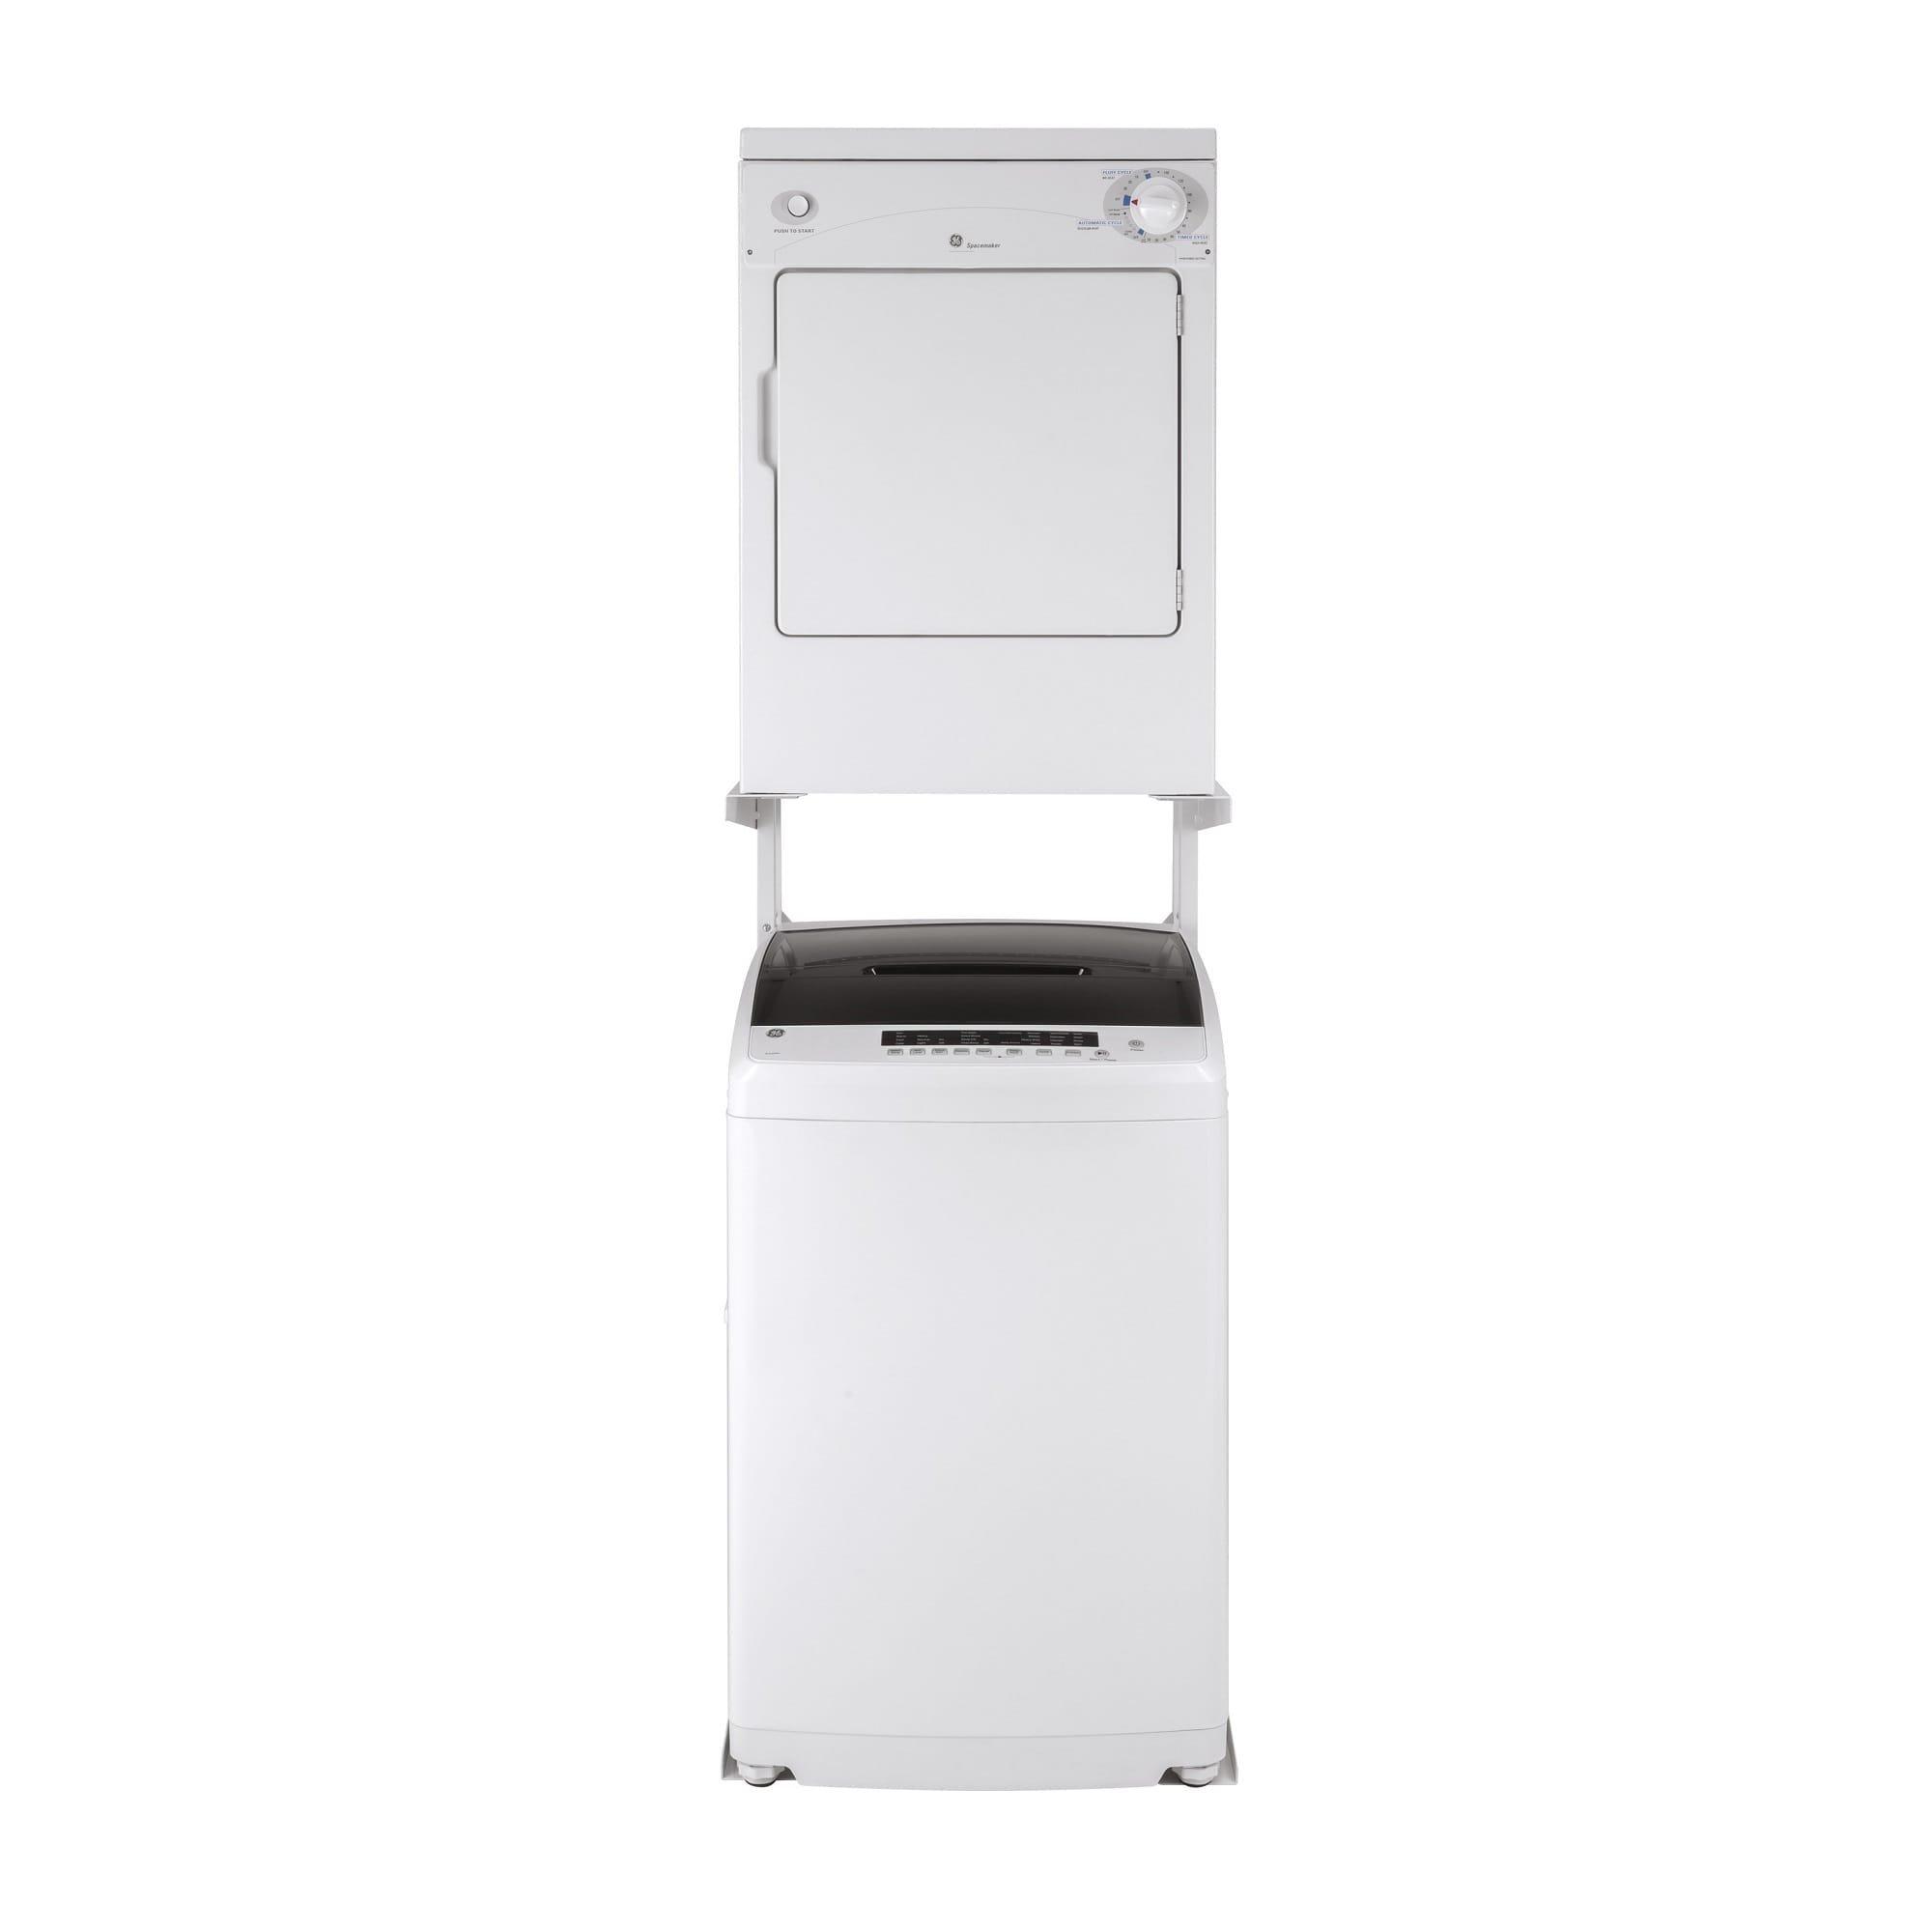 https://i8.amplience.net/i/aarons/7401GT7_01/Space%20Saving%202.8%20cu.%20ft.%20Portable%20Washer%20&%203.6%20cu.%20ft.%20120V%20Portable%20Electric%20Dryer?$large$